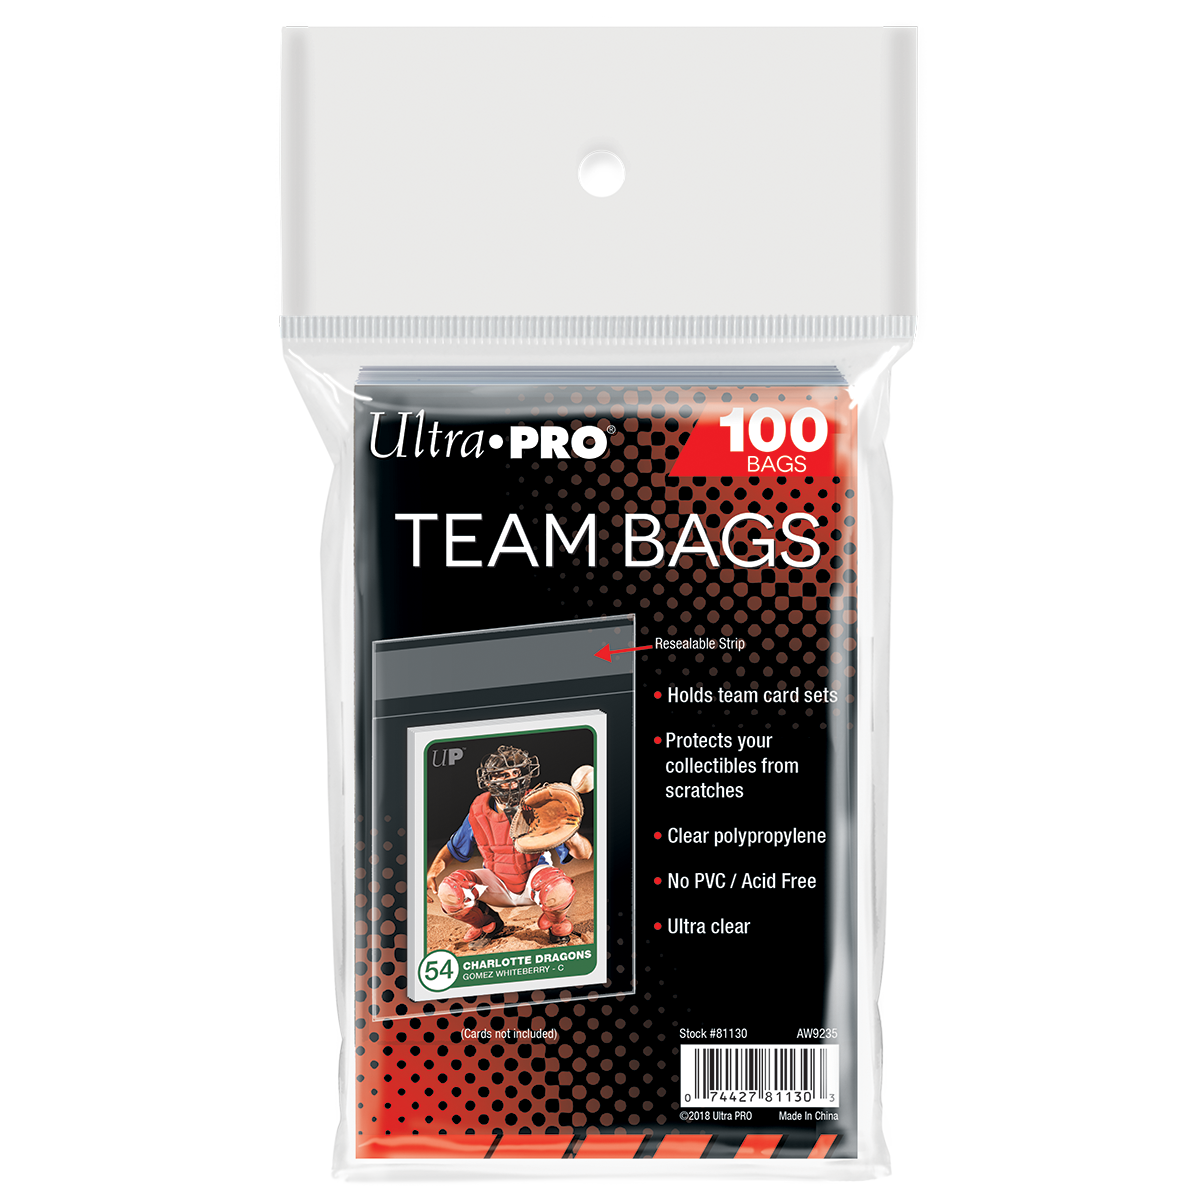 100) Current Size Ultra Clear Resealable Comic Book Bags and